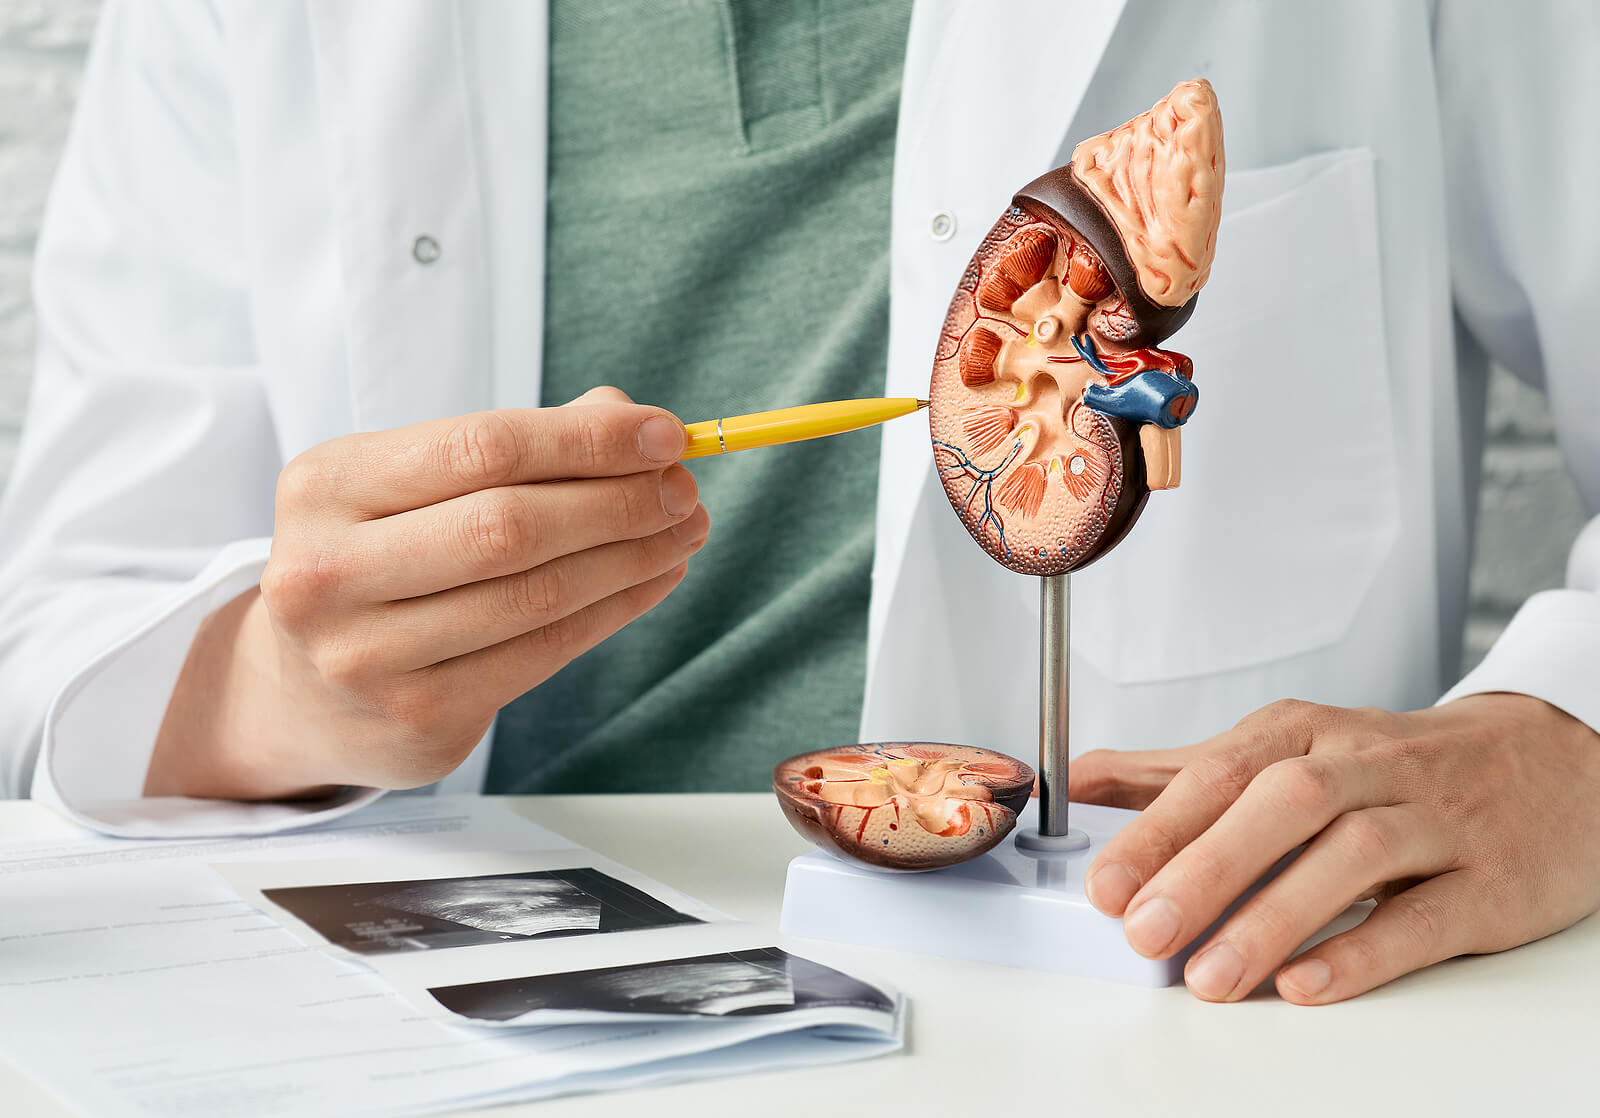 A doctor pointing to a model of a kidney.